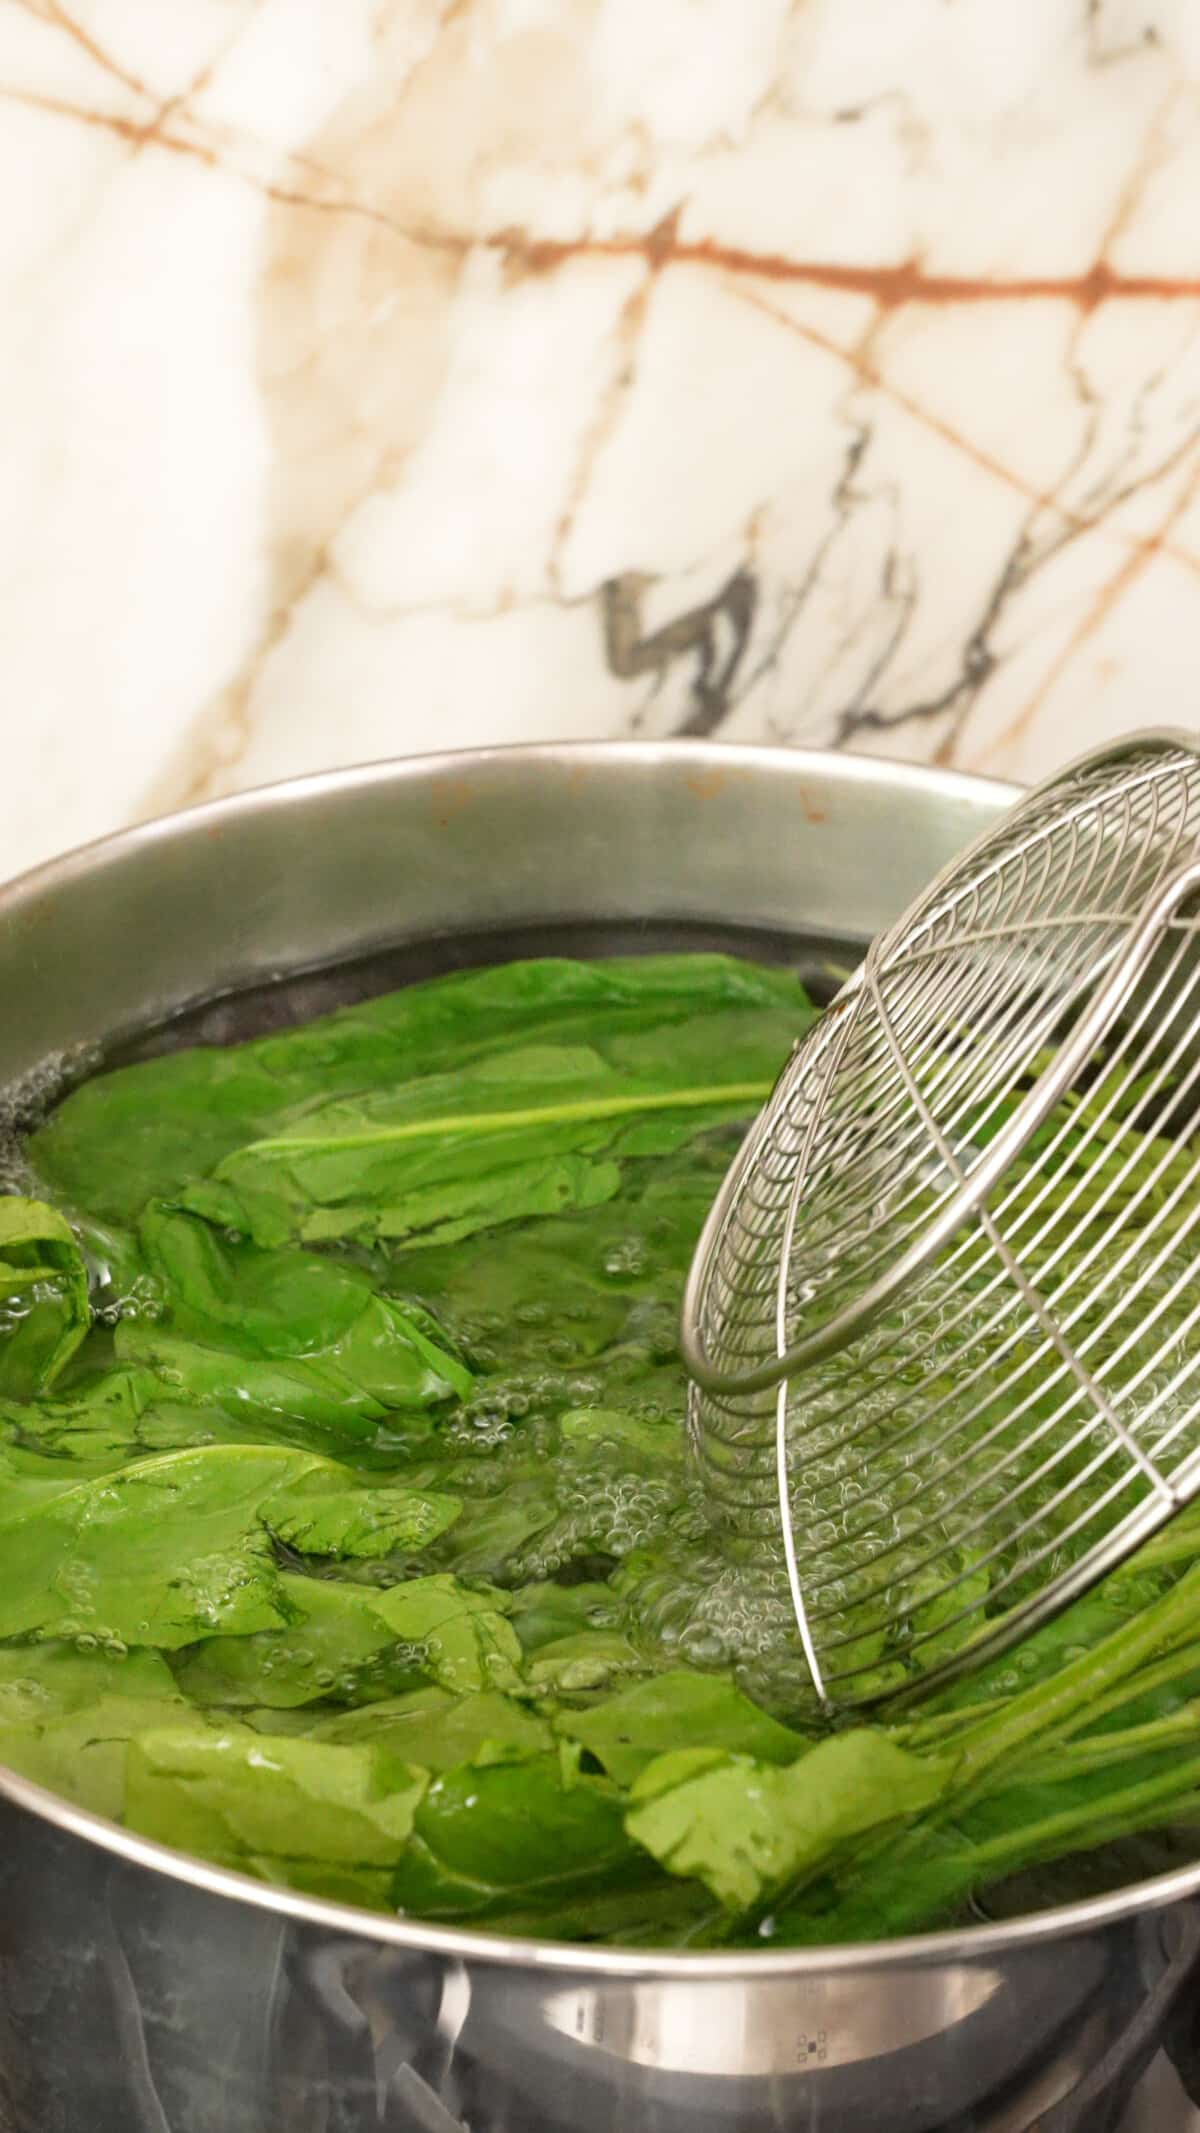 Spinach blanching in boiling water.